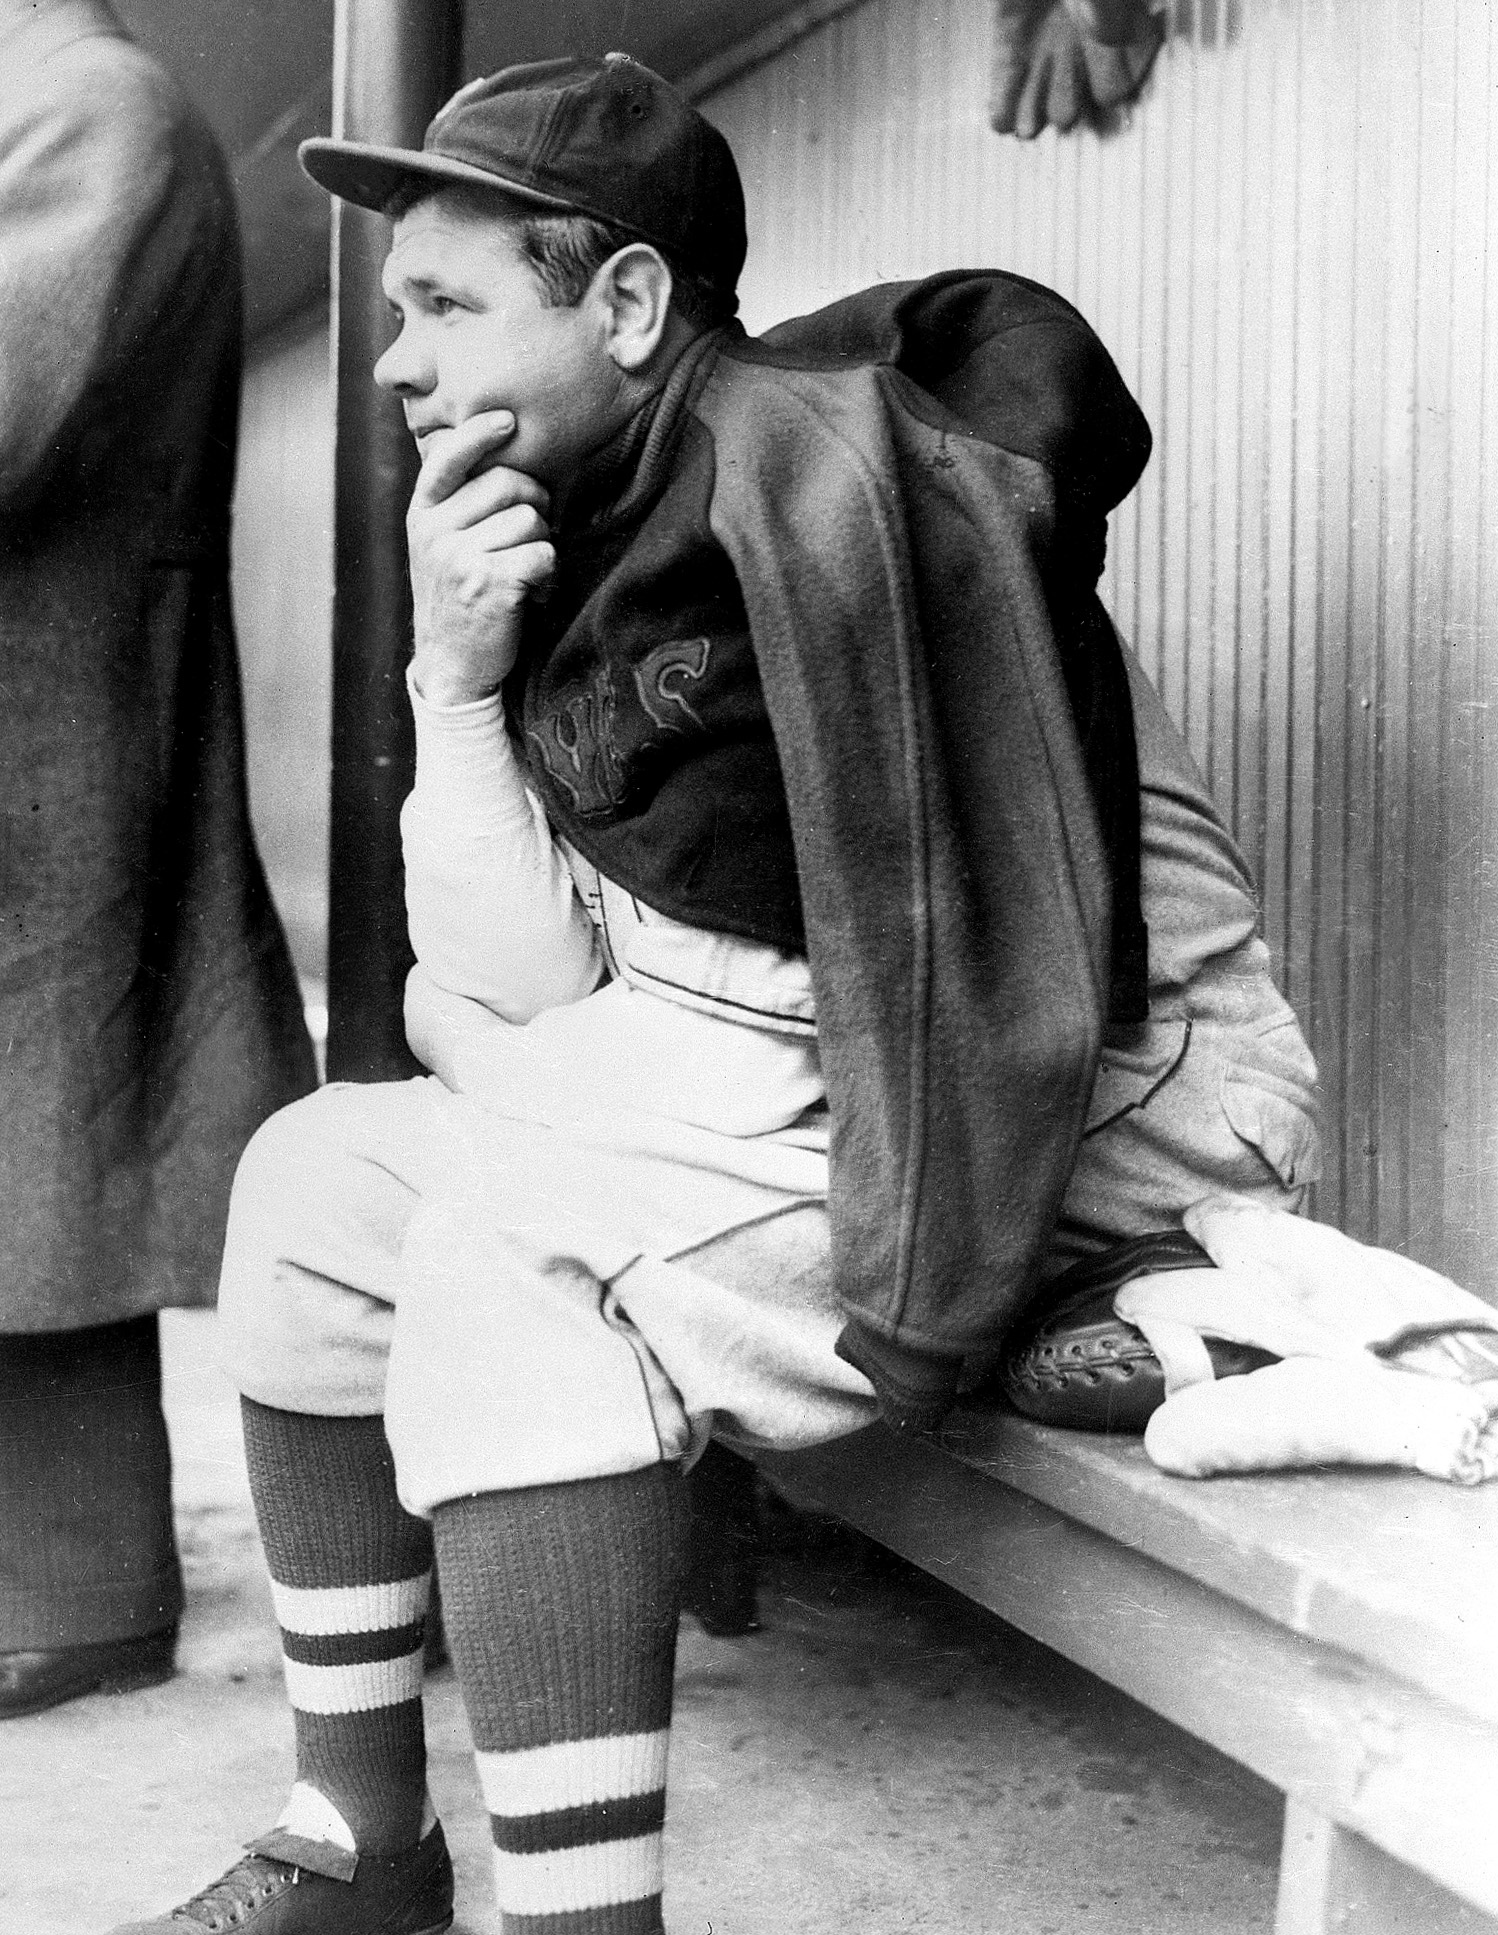 May 25, 1935 – Babe Ruth hits his last three home runs setting a career  record with 714, a record that would stand for 39 years